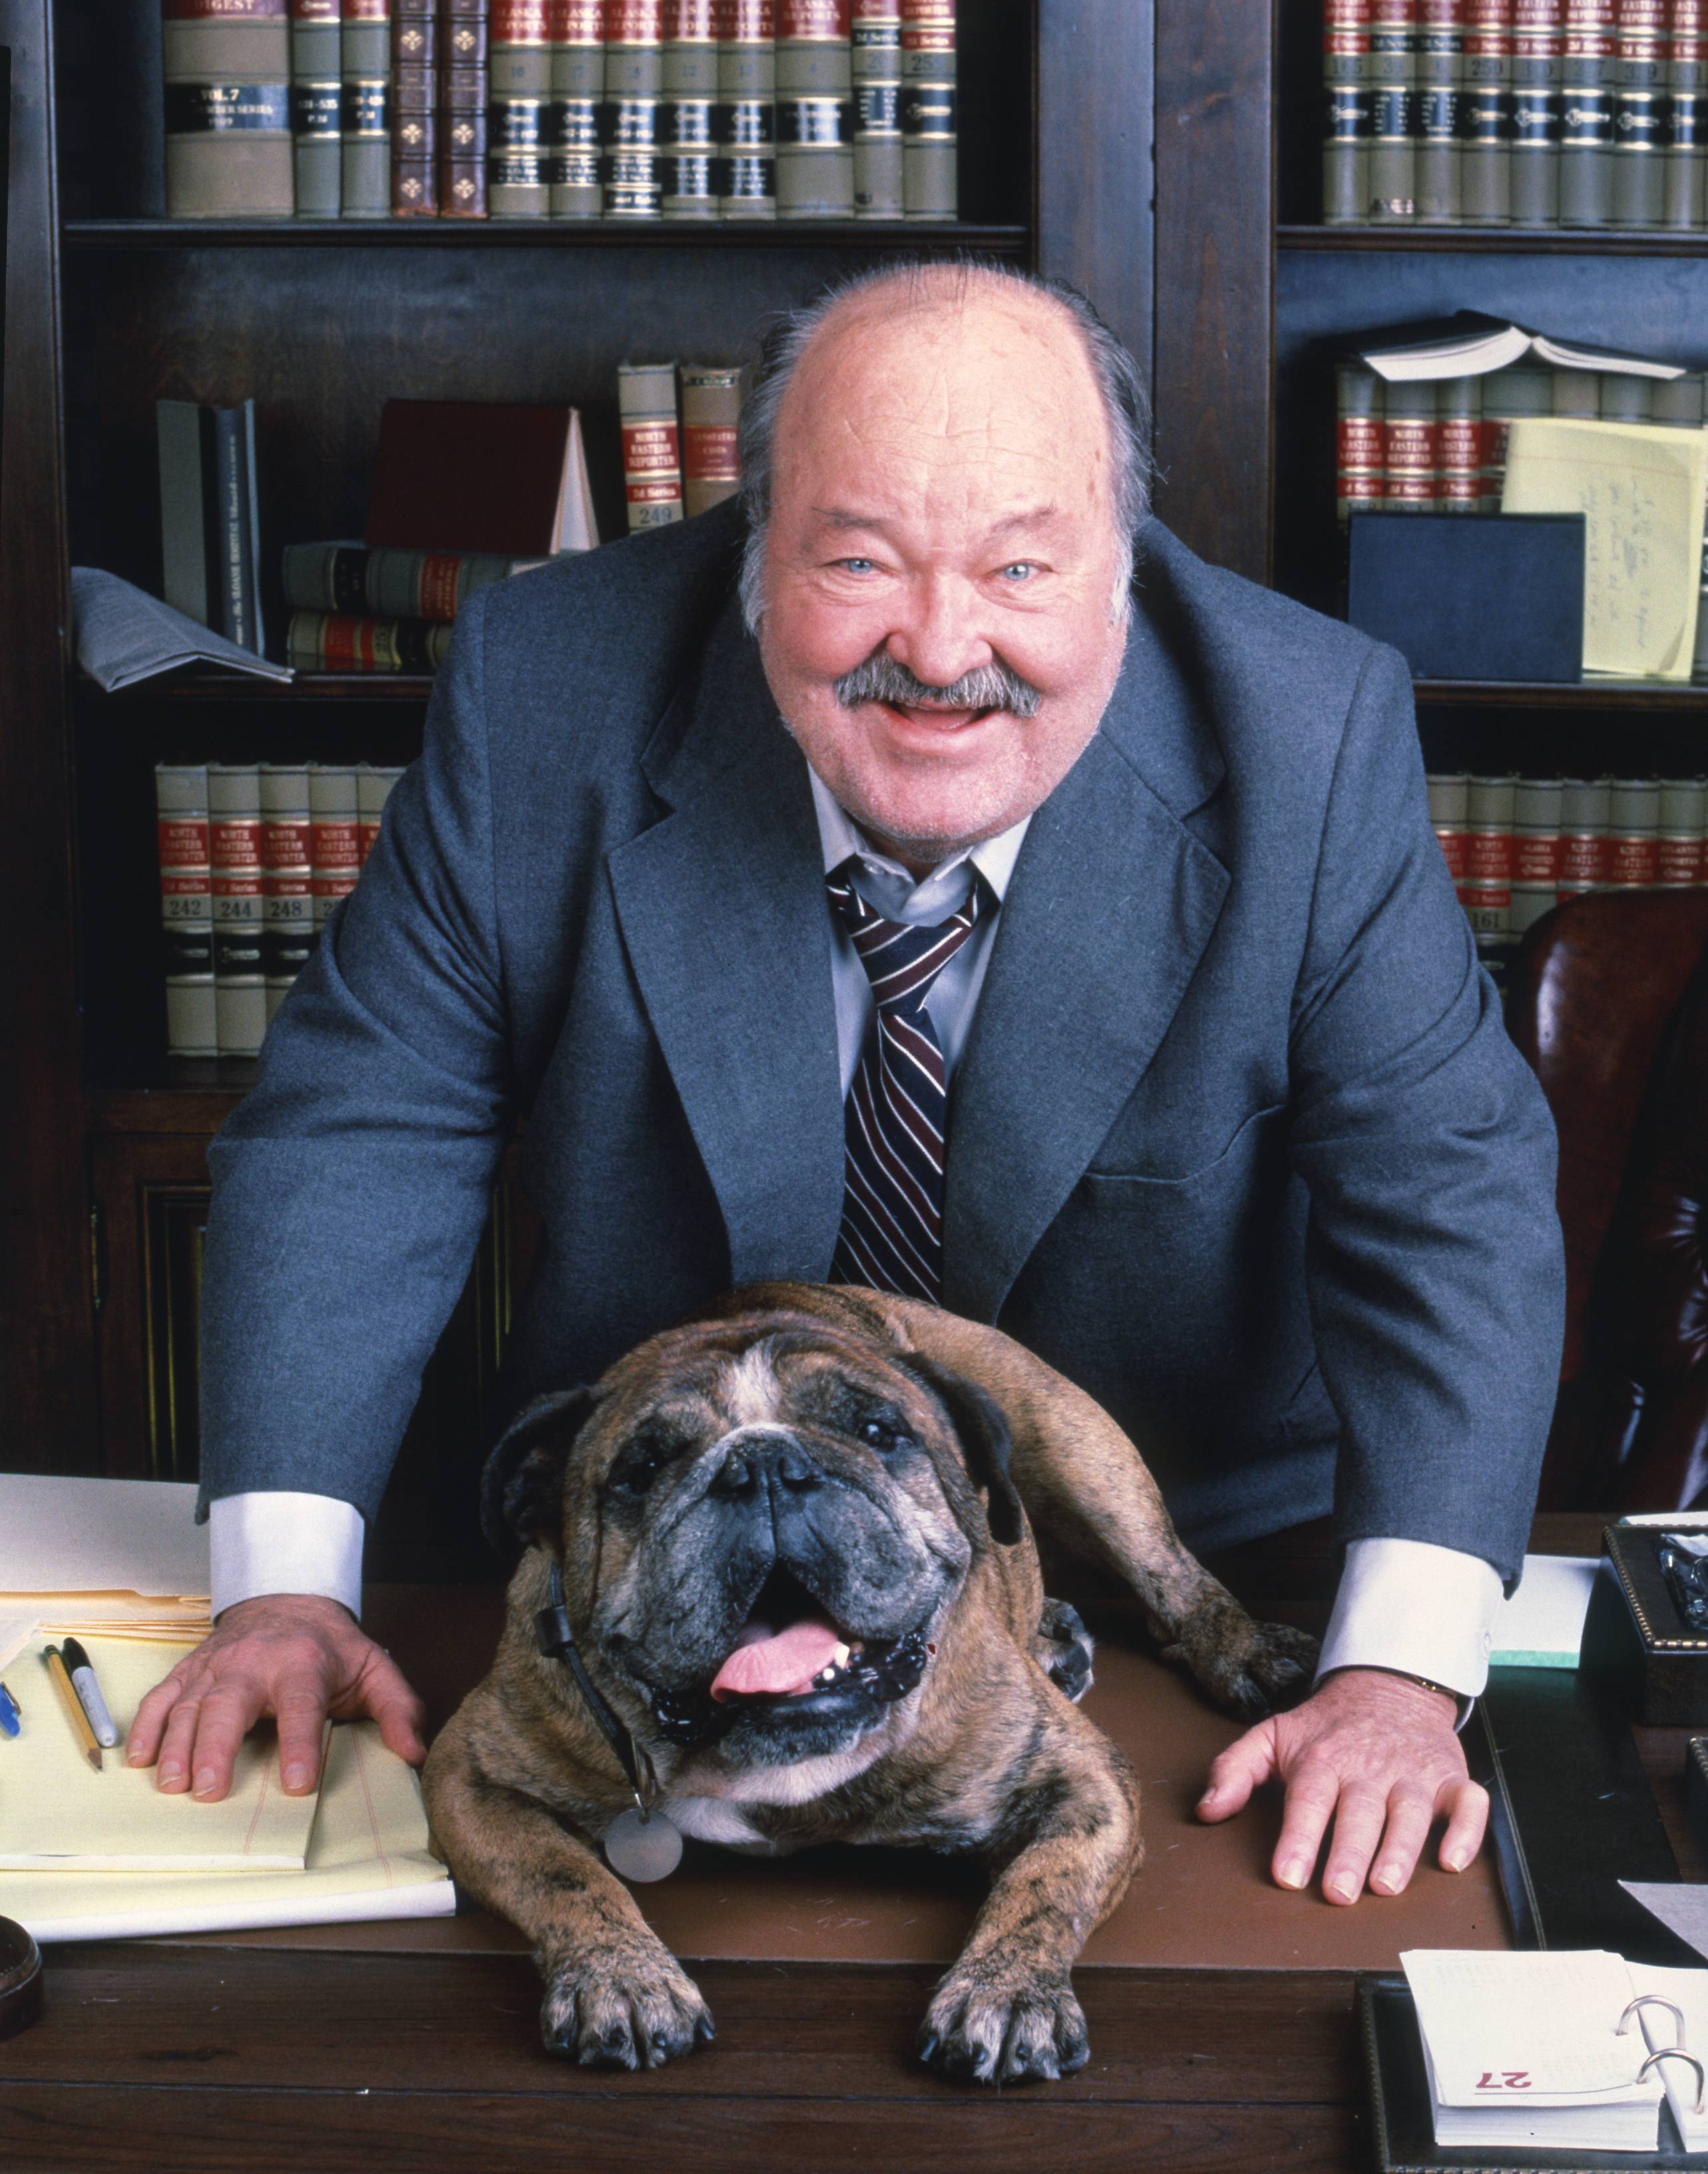 'Jake and the Fatman' star William Conrad leaning on a desk on which sits an English bulldog, 1990